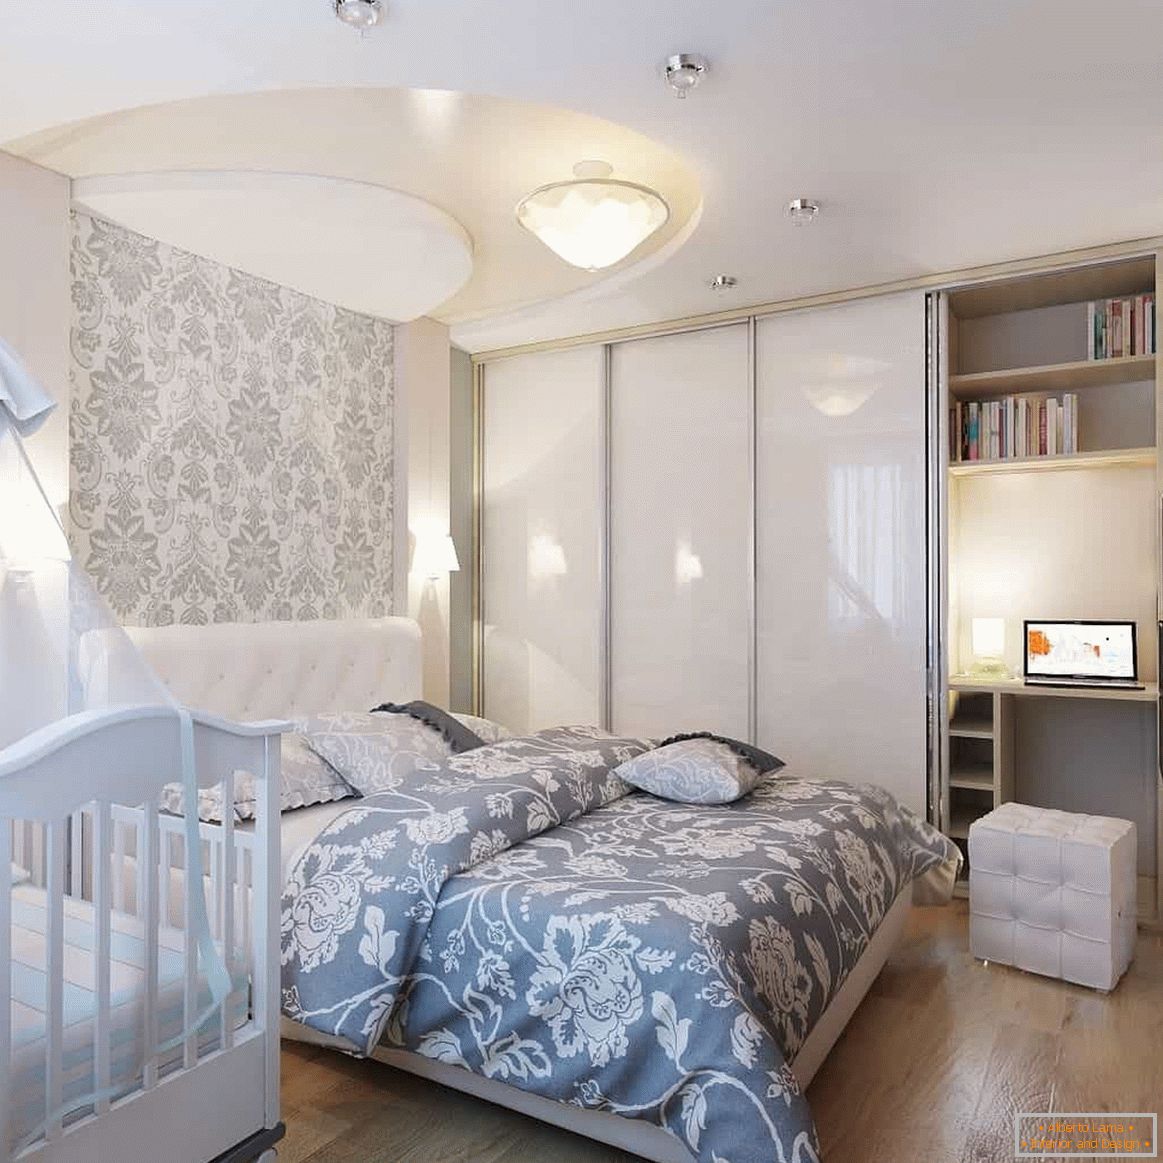 Bedroom 4 by 4 meters with a cot